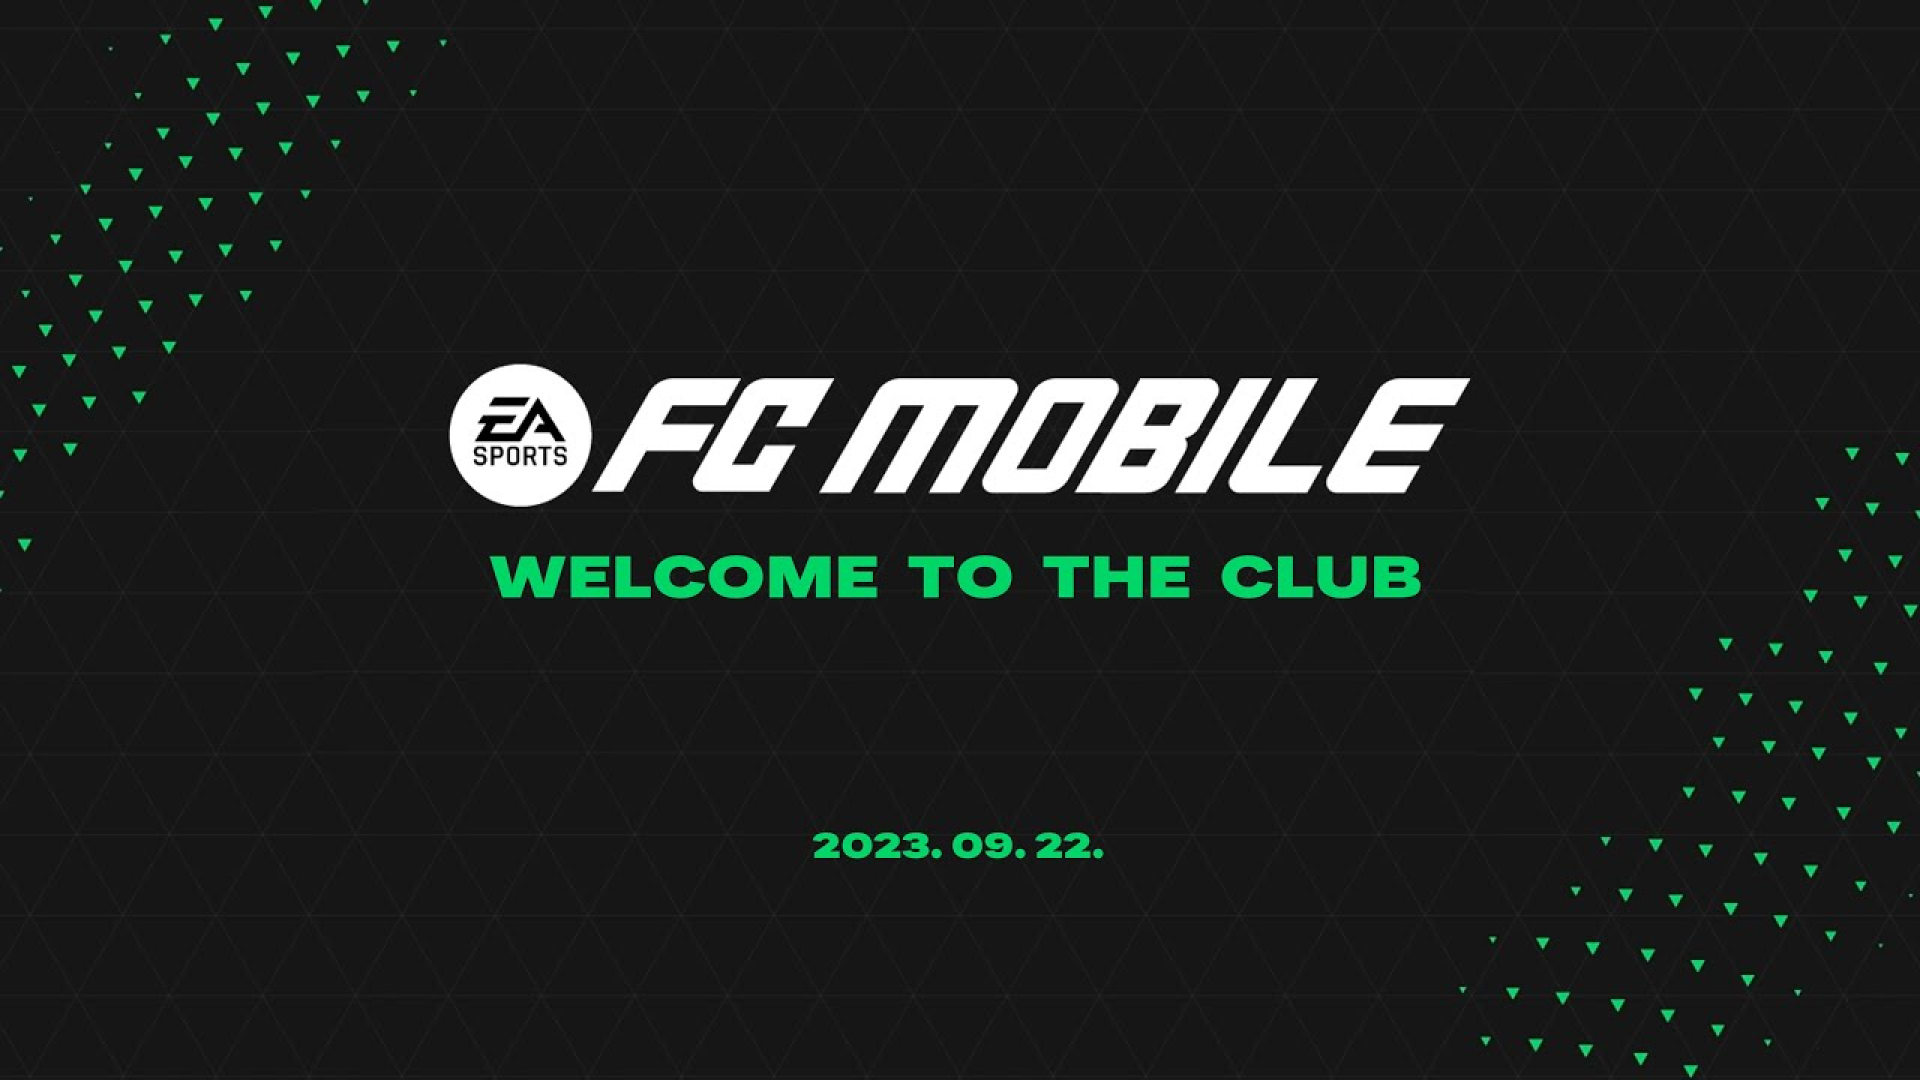 Banner of EA SPORTS FC™ MOBILE 13.0.04